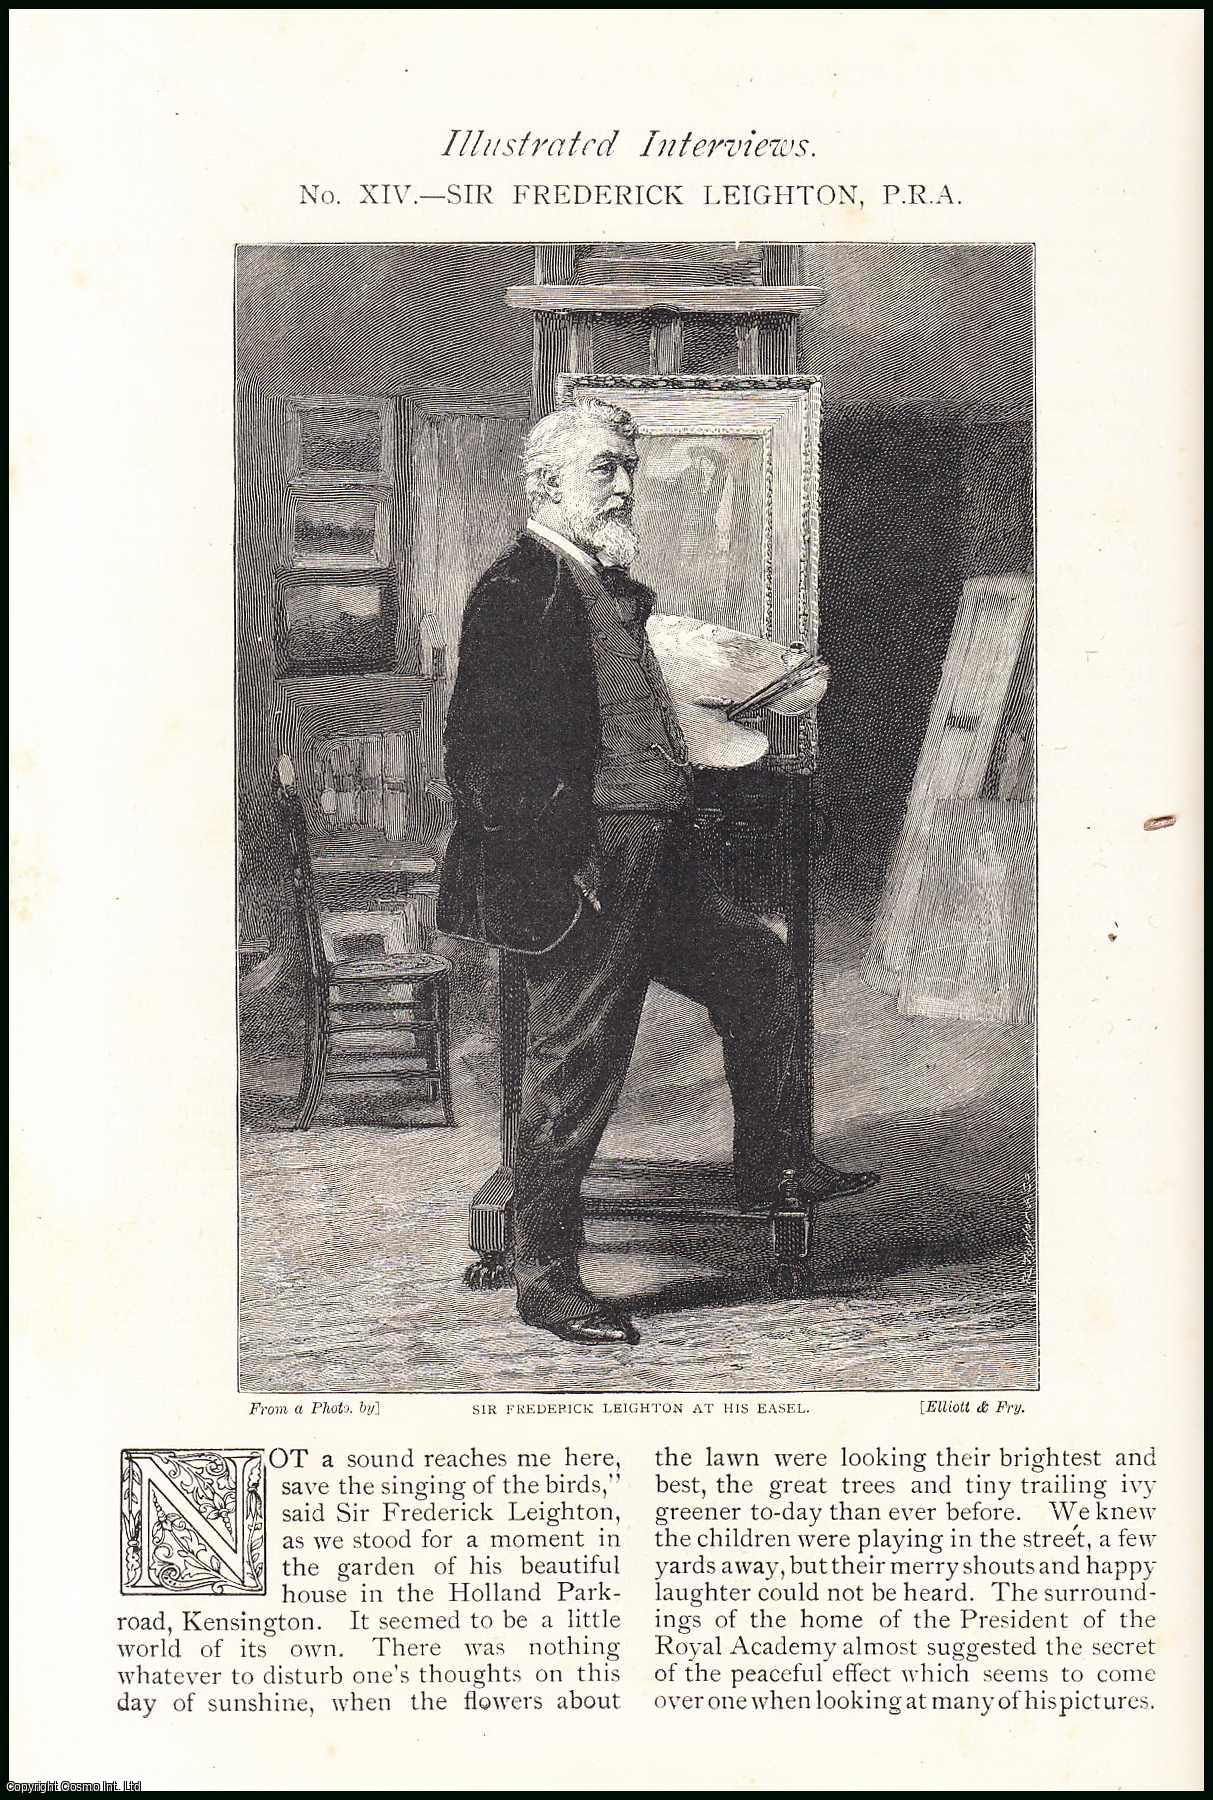 Harry How - Sir Frederick Leighton, Painter. Illustrated Interviews. An original article from The Strand Magazine, 1892.